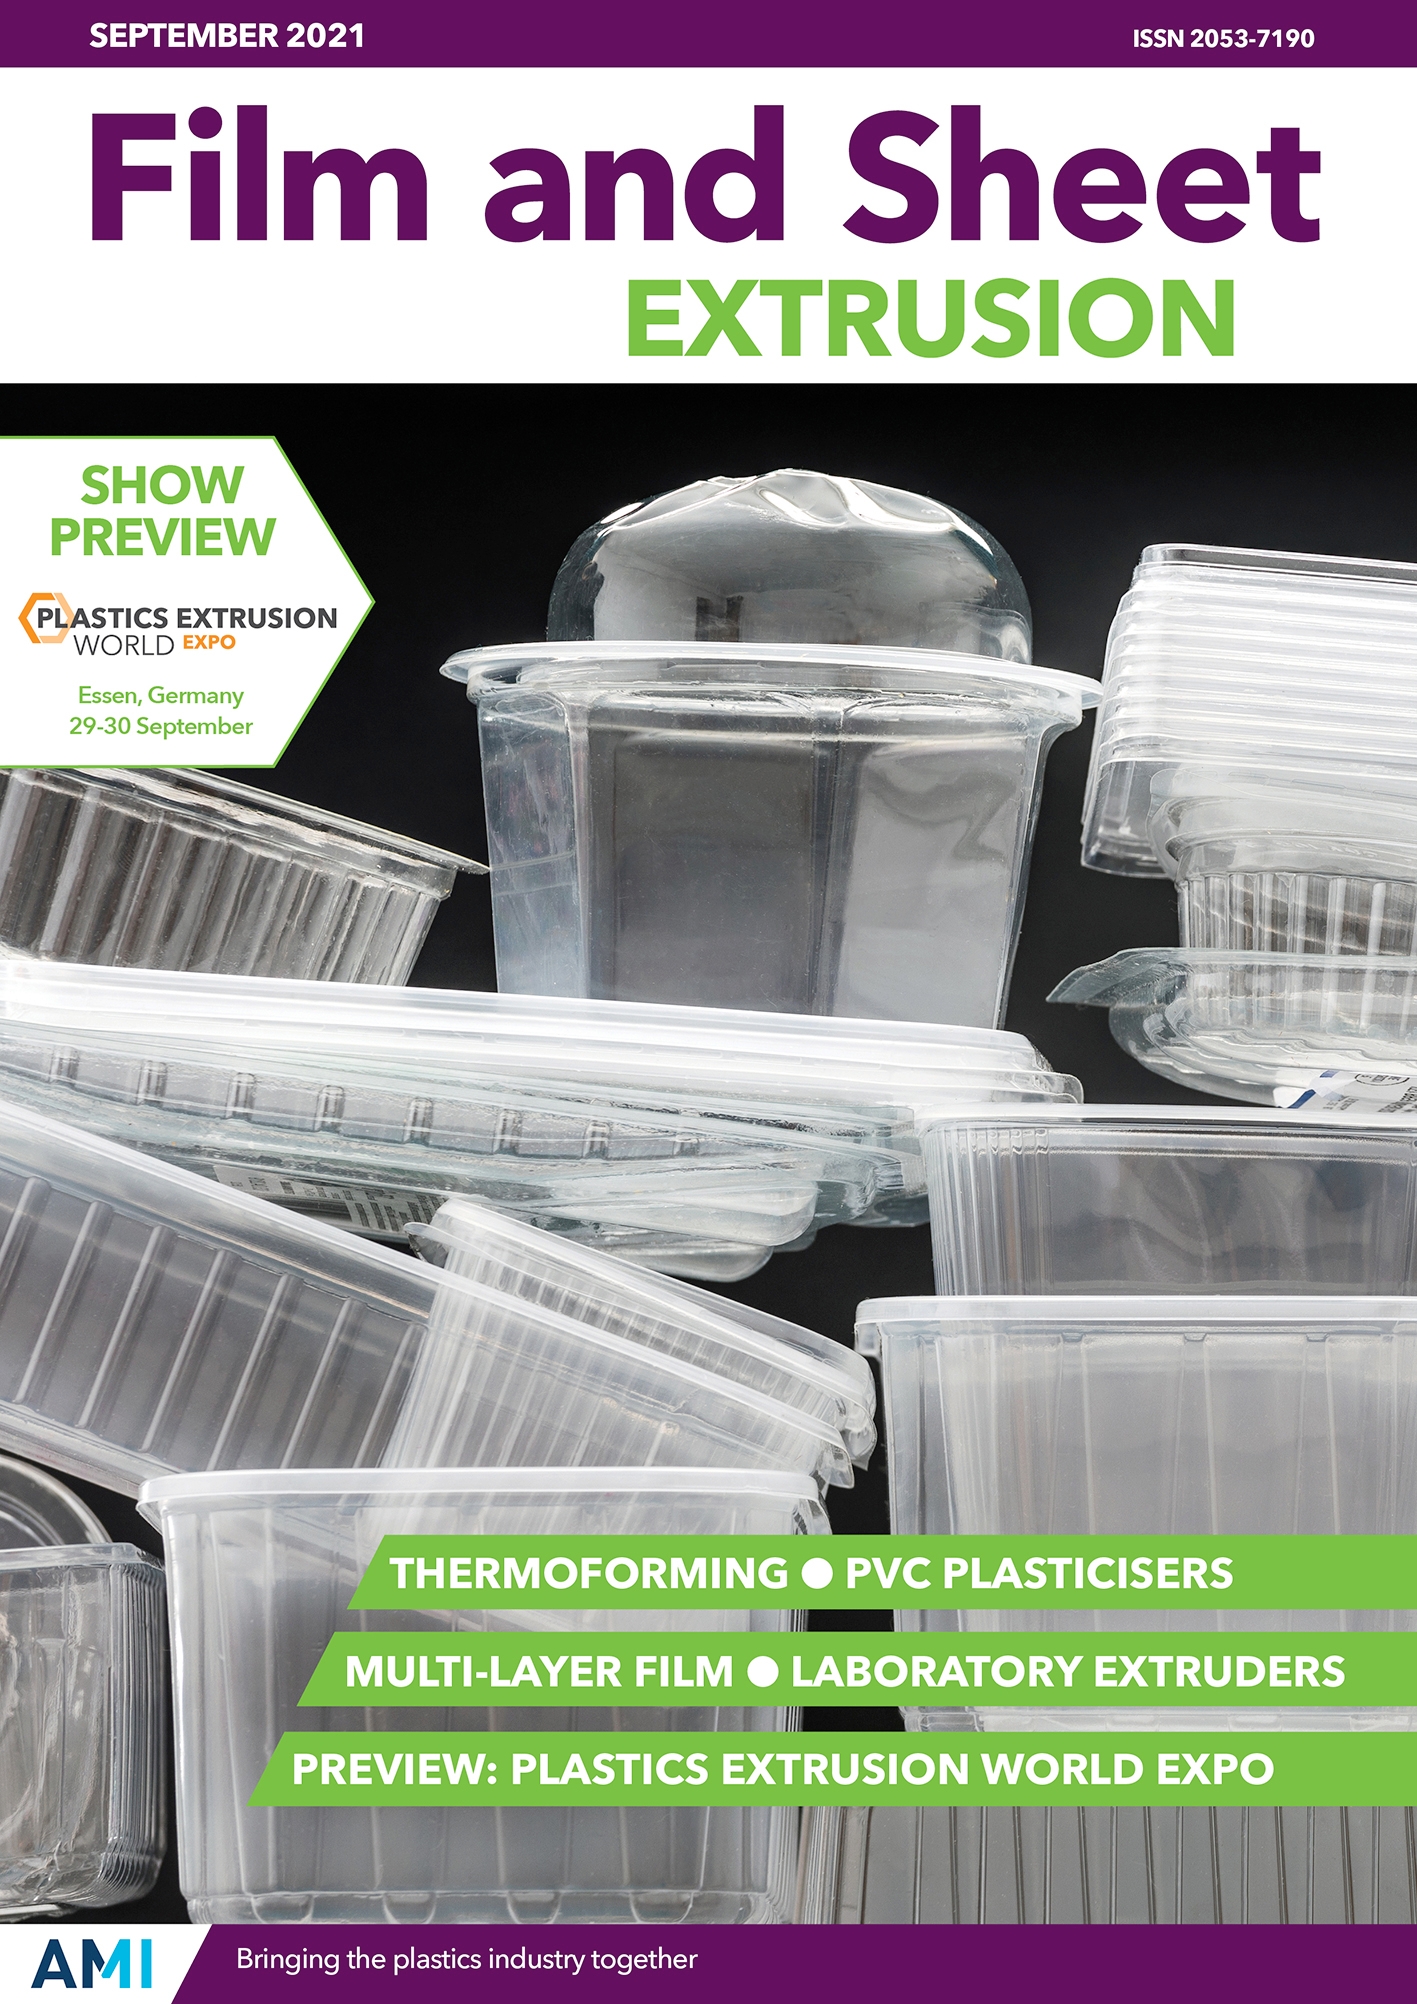 Film and Sheet Extrusion September 2021